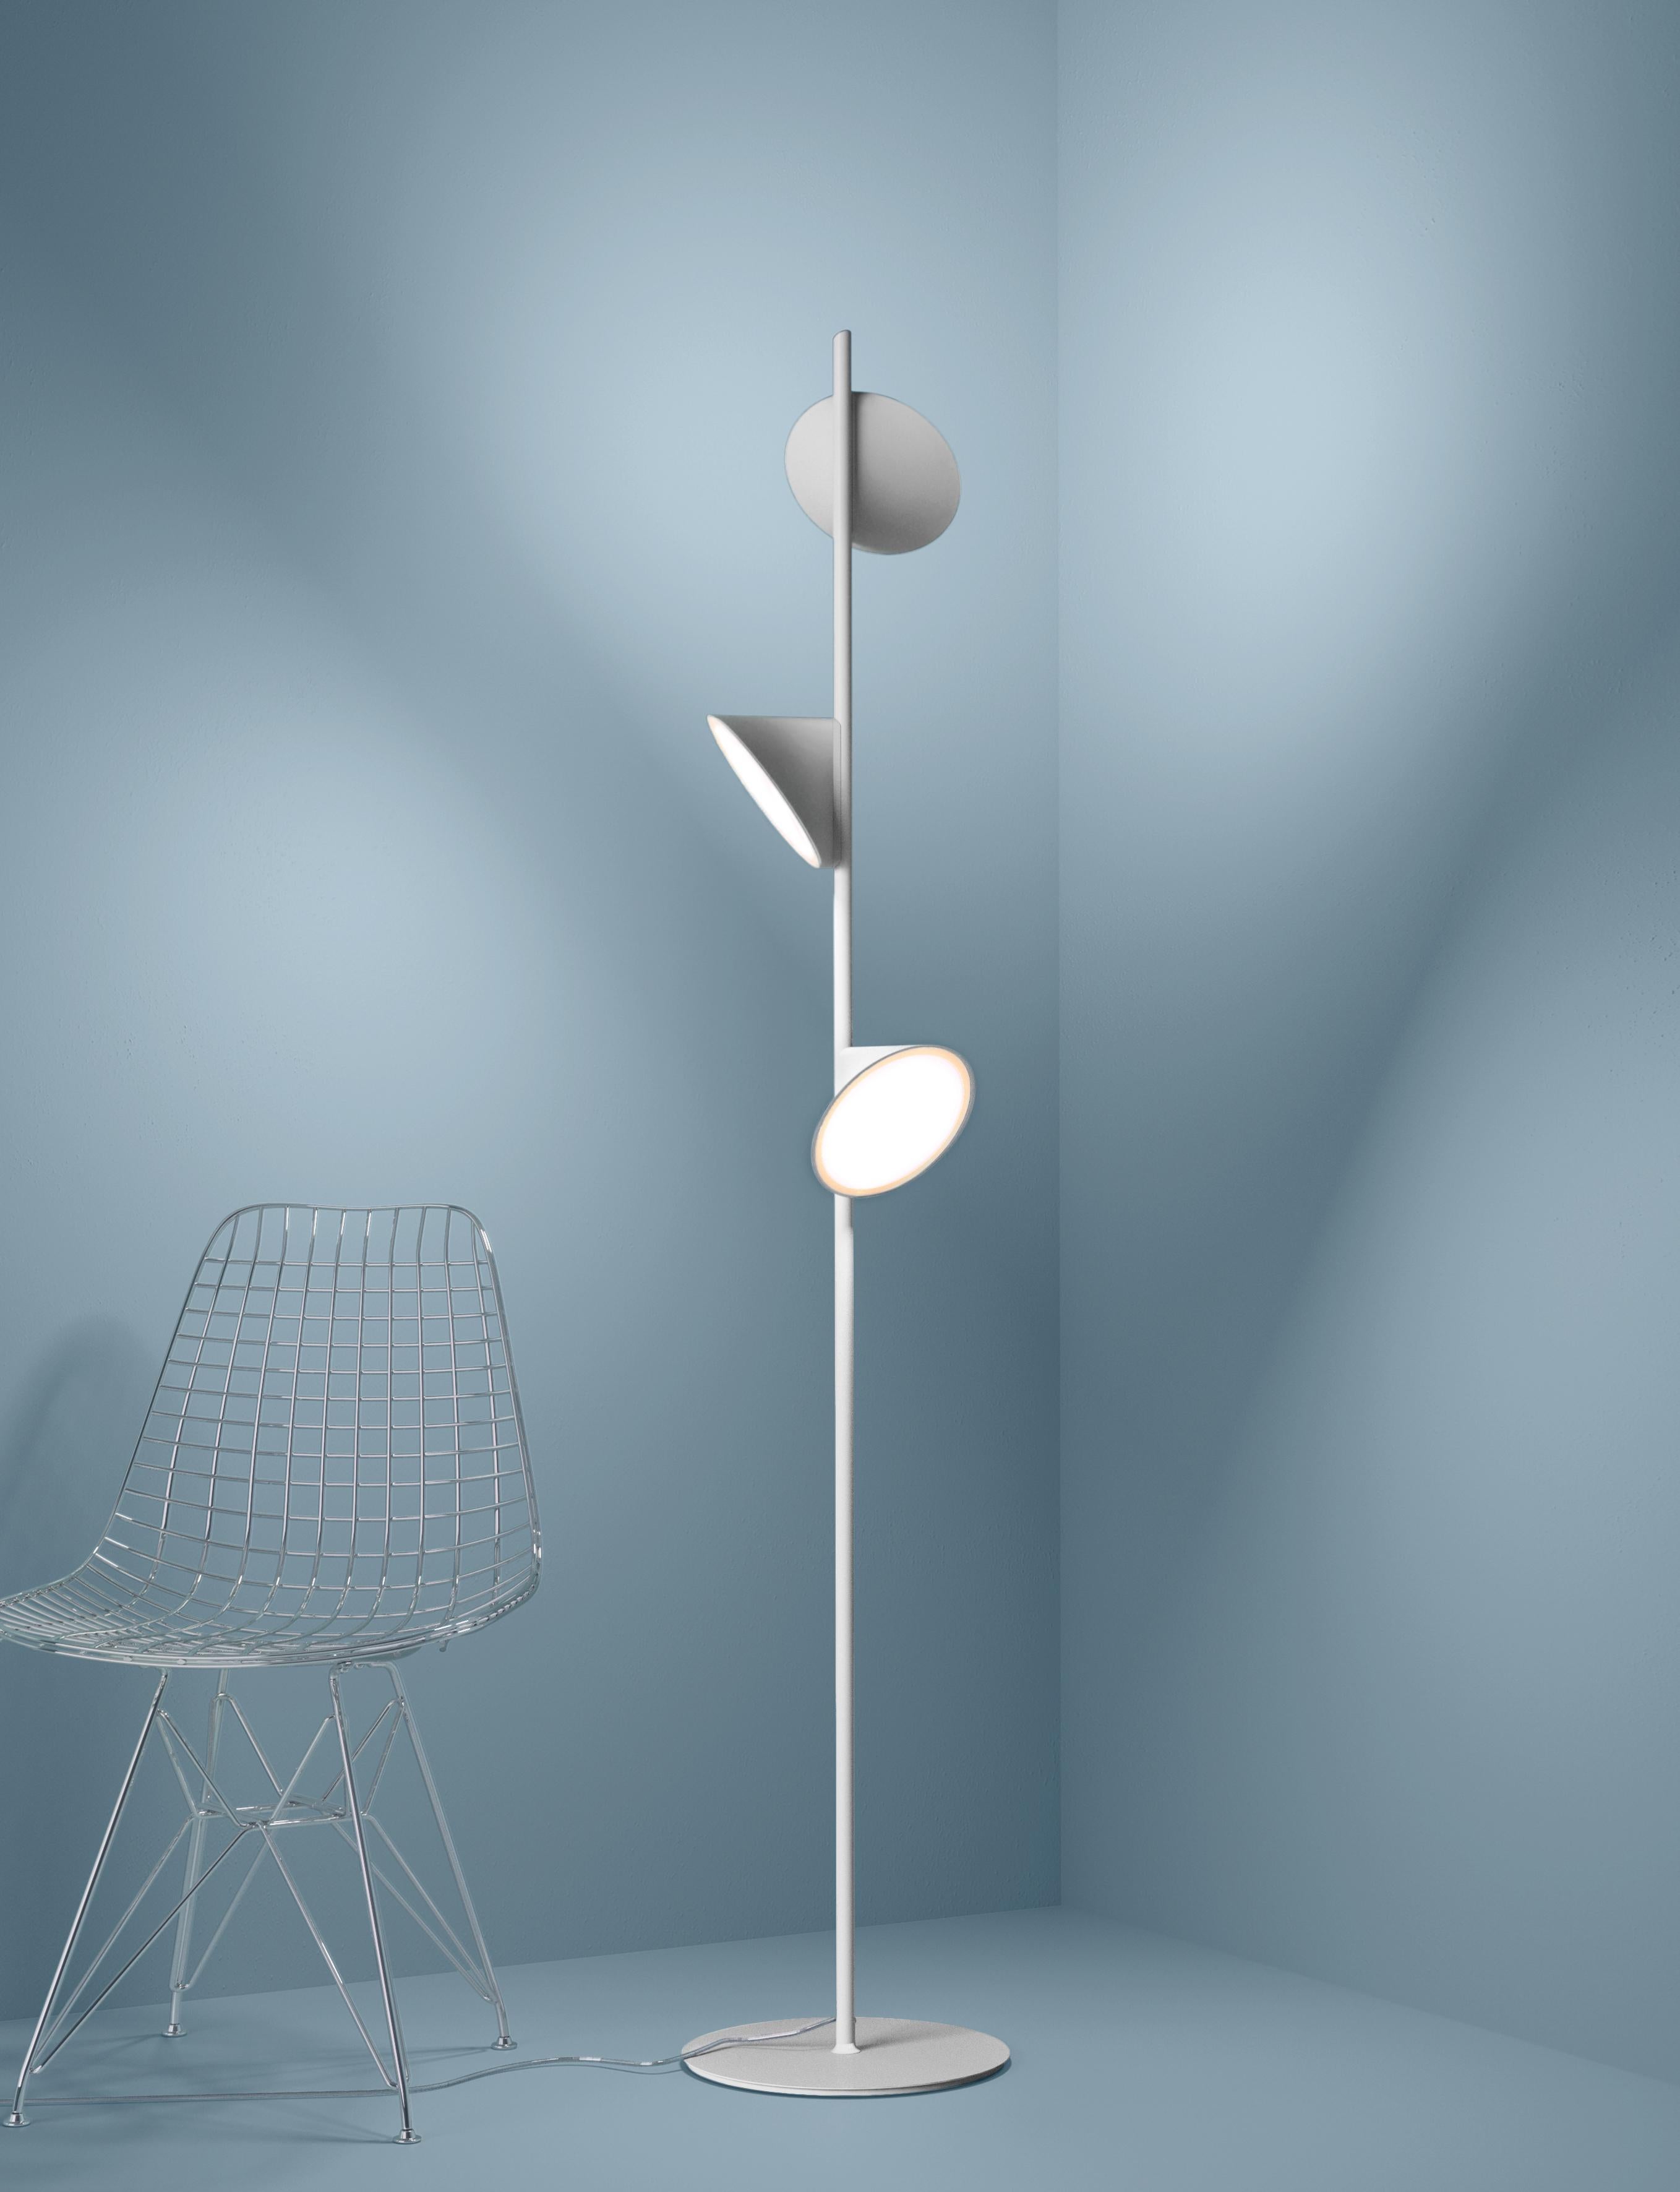 Axolight Orchid Floor Lamp with Die Cast Aluminum Body in Sand by Rainer Mutsch

Orchid design expresses the enchantment of nature with its splendid stems and buds. Direct light beams like rays of sun and intense diffused glow to gracefully